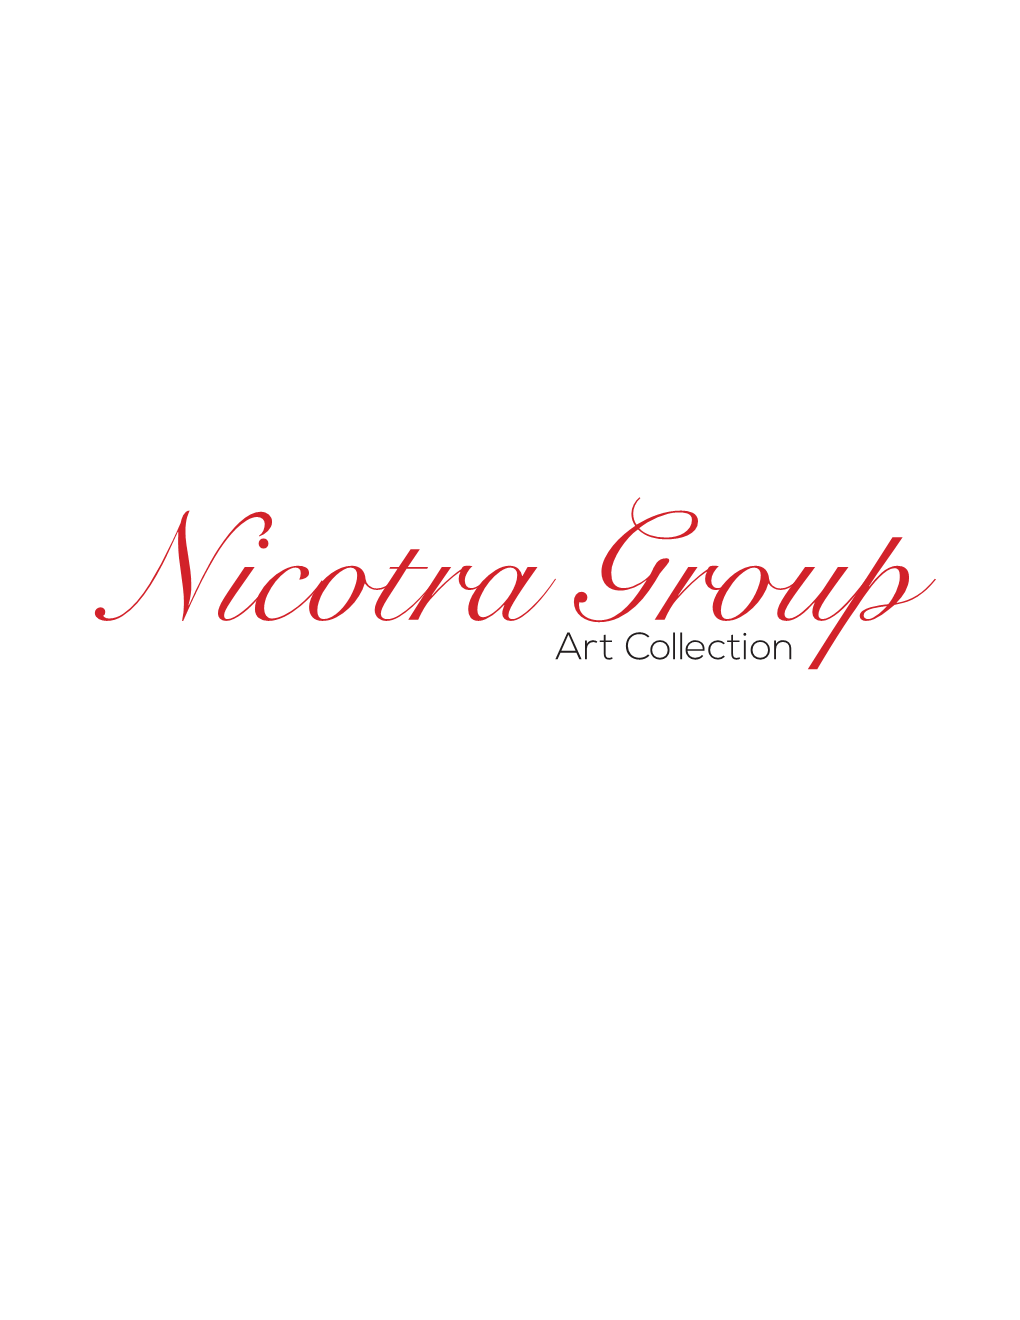 Nicotra Group Art Collection